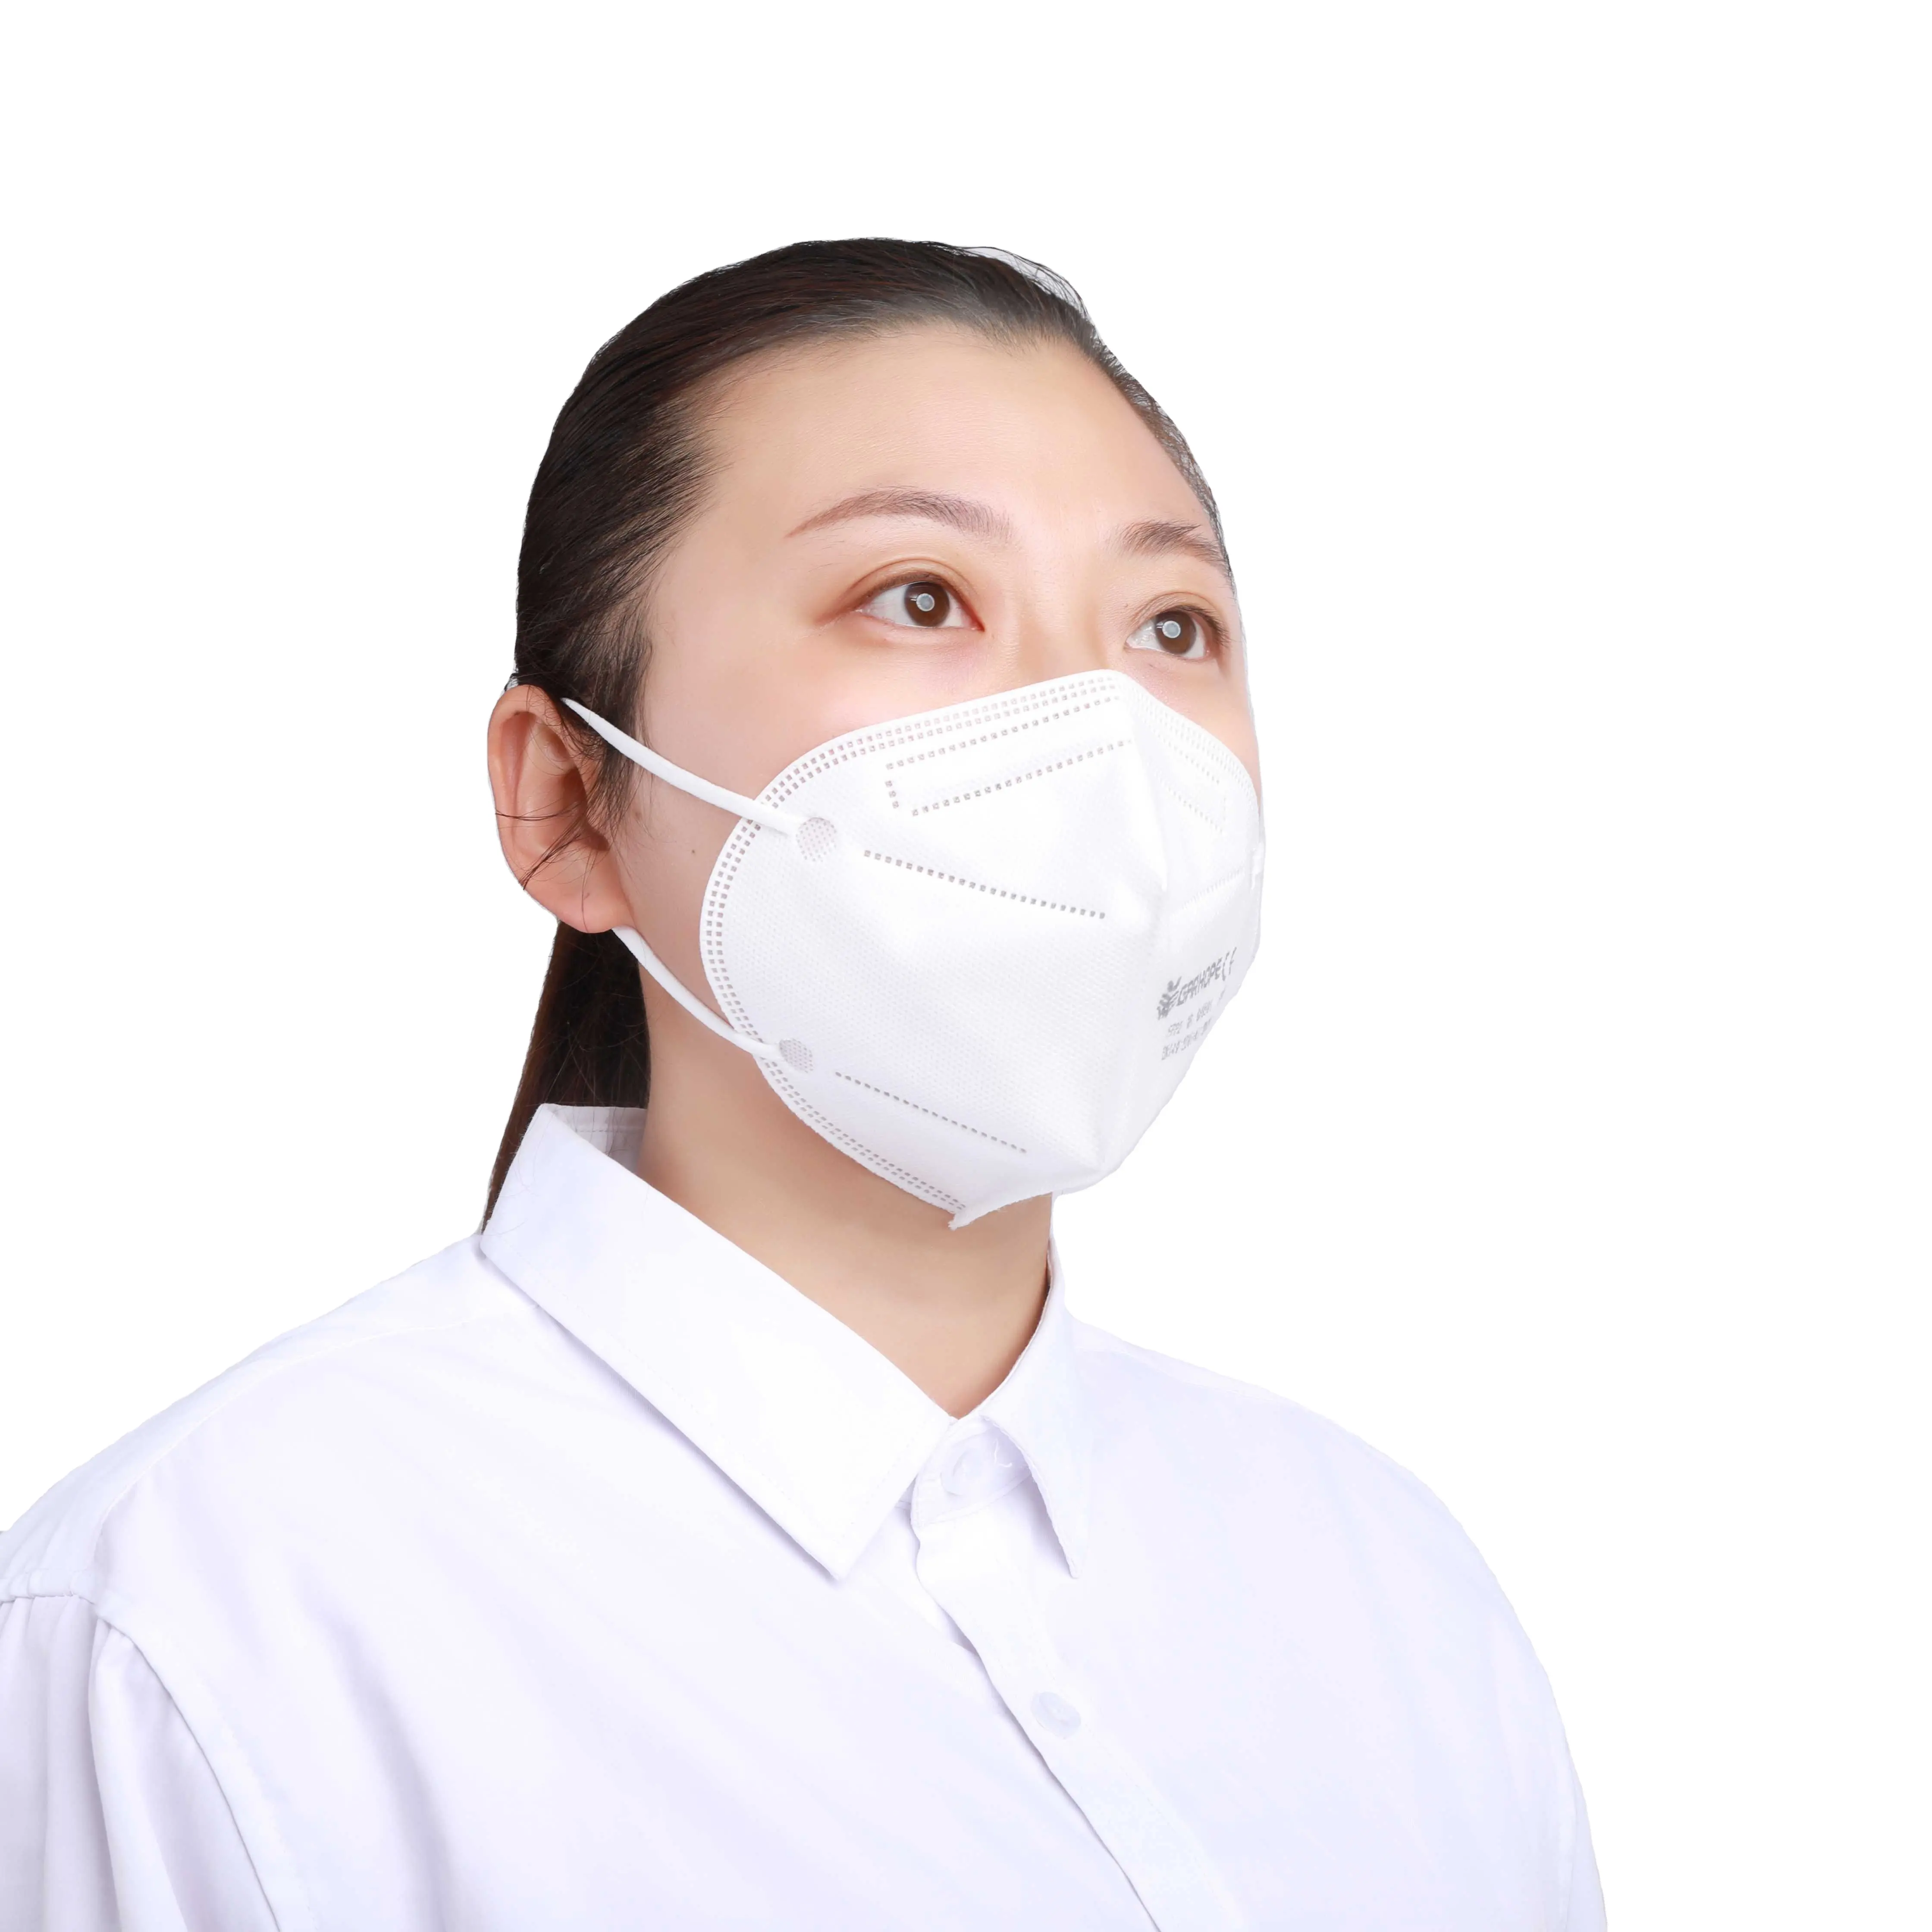 Mask Filter New Type Mask Cute Kn95 Top Sale Filtering Half Mask Cute Kn95 Face Mask Earloop